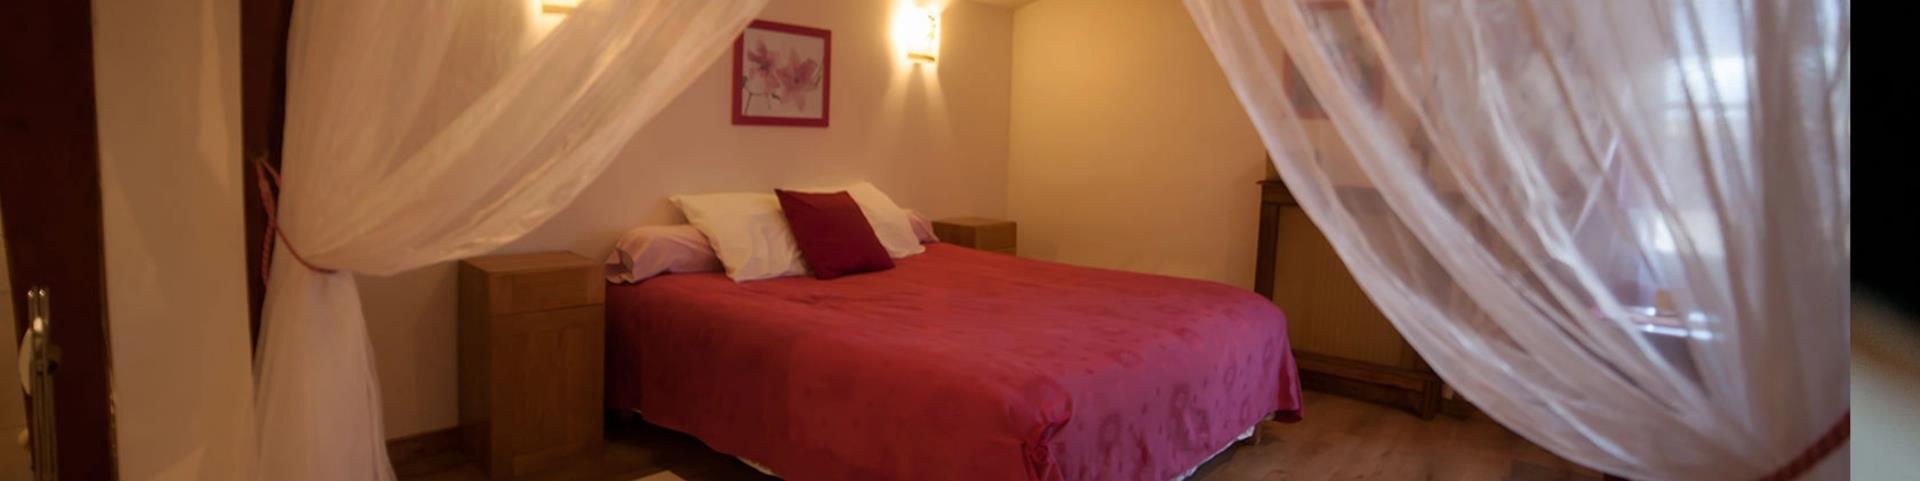 Bed and breakfast accommodation in the Aude at Château Borie Neuve in Badens near Carcassonne